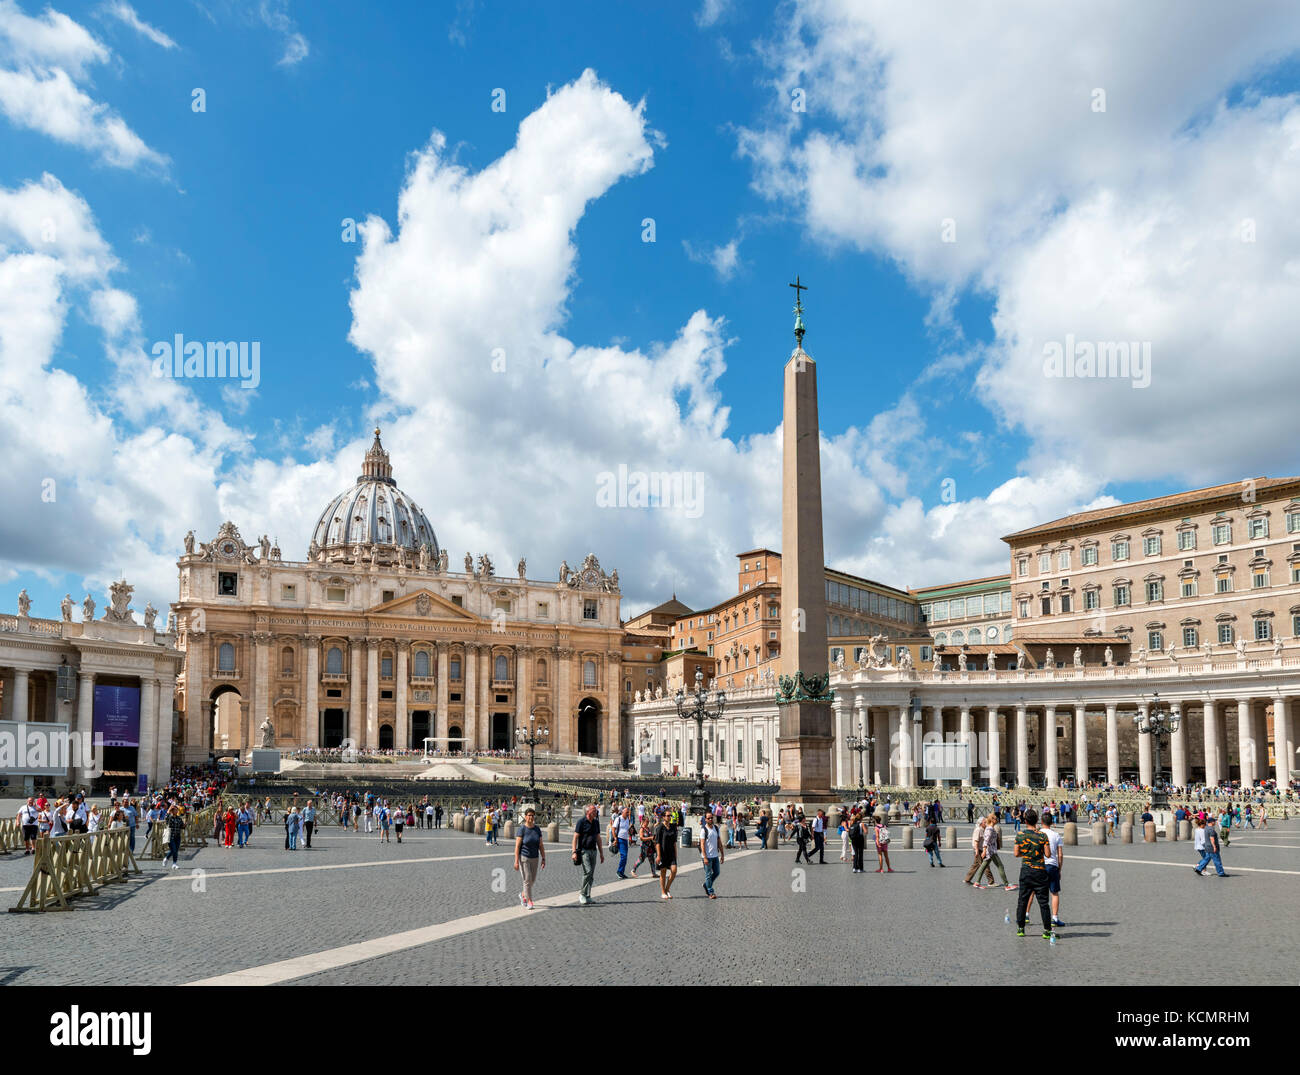 St Peter's Basilica and Saint Peter's Square, Vatican City, Rome, Italy Stock Photo